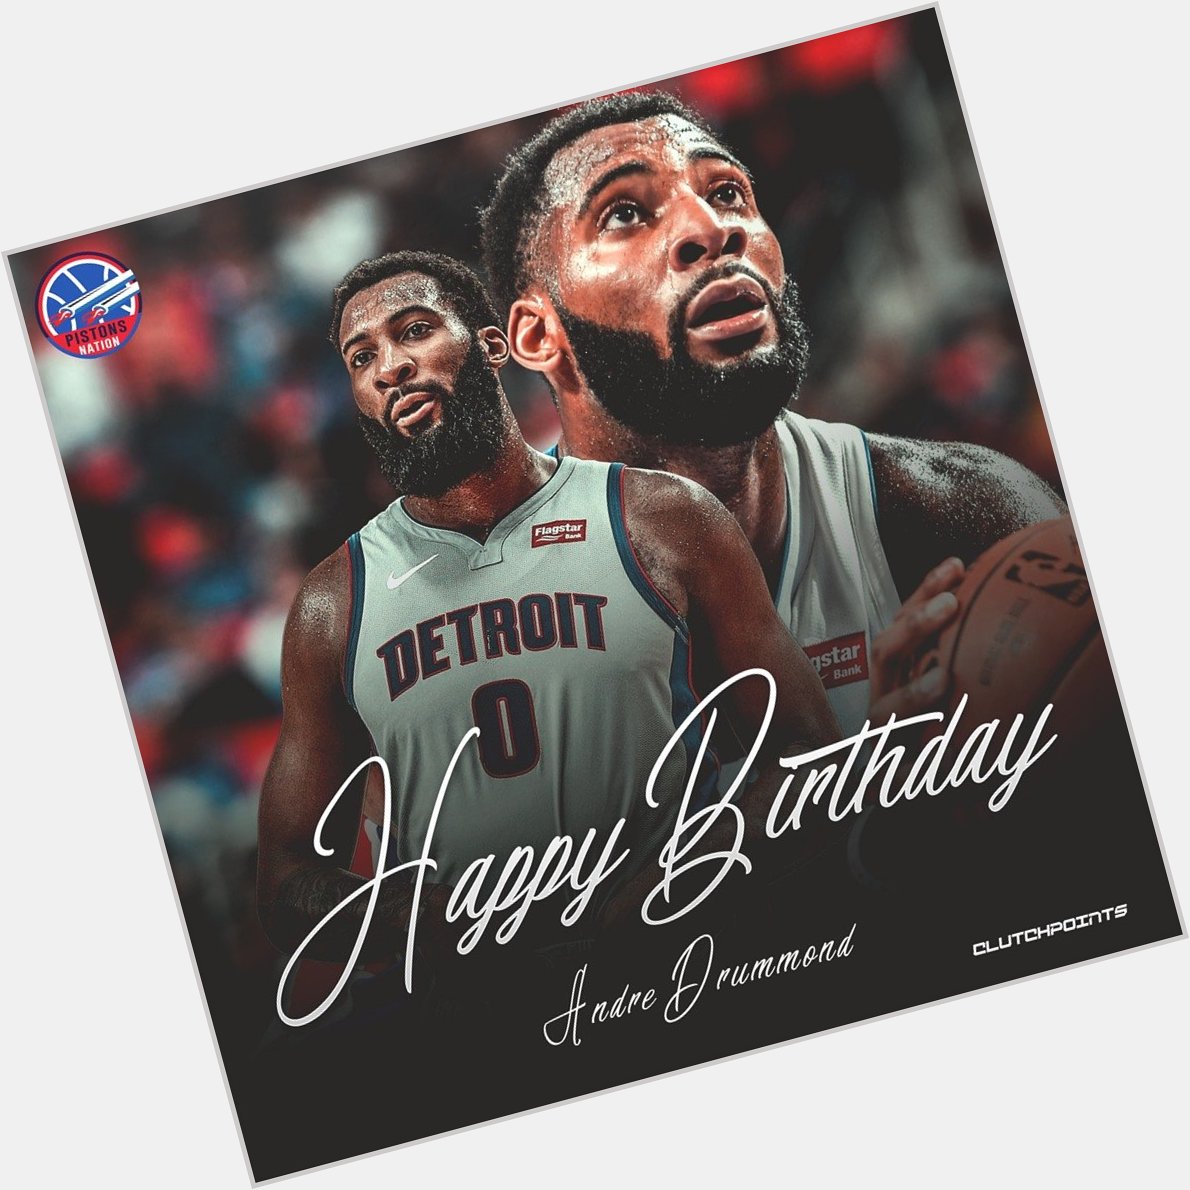 Join Pistons Nation in wishing Andre Drummond a happy 26th birthday!  